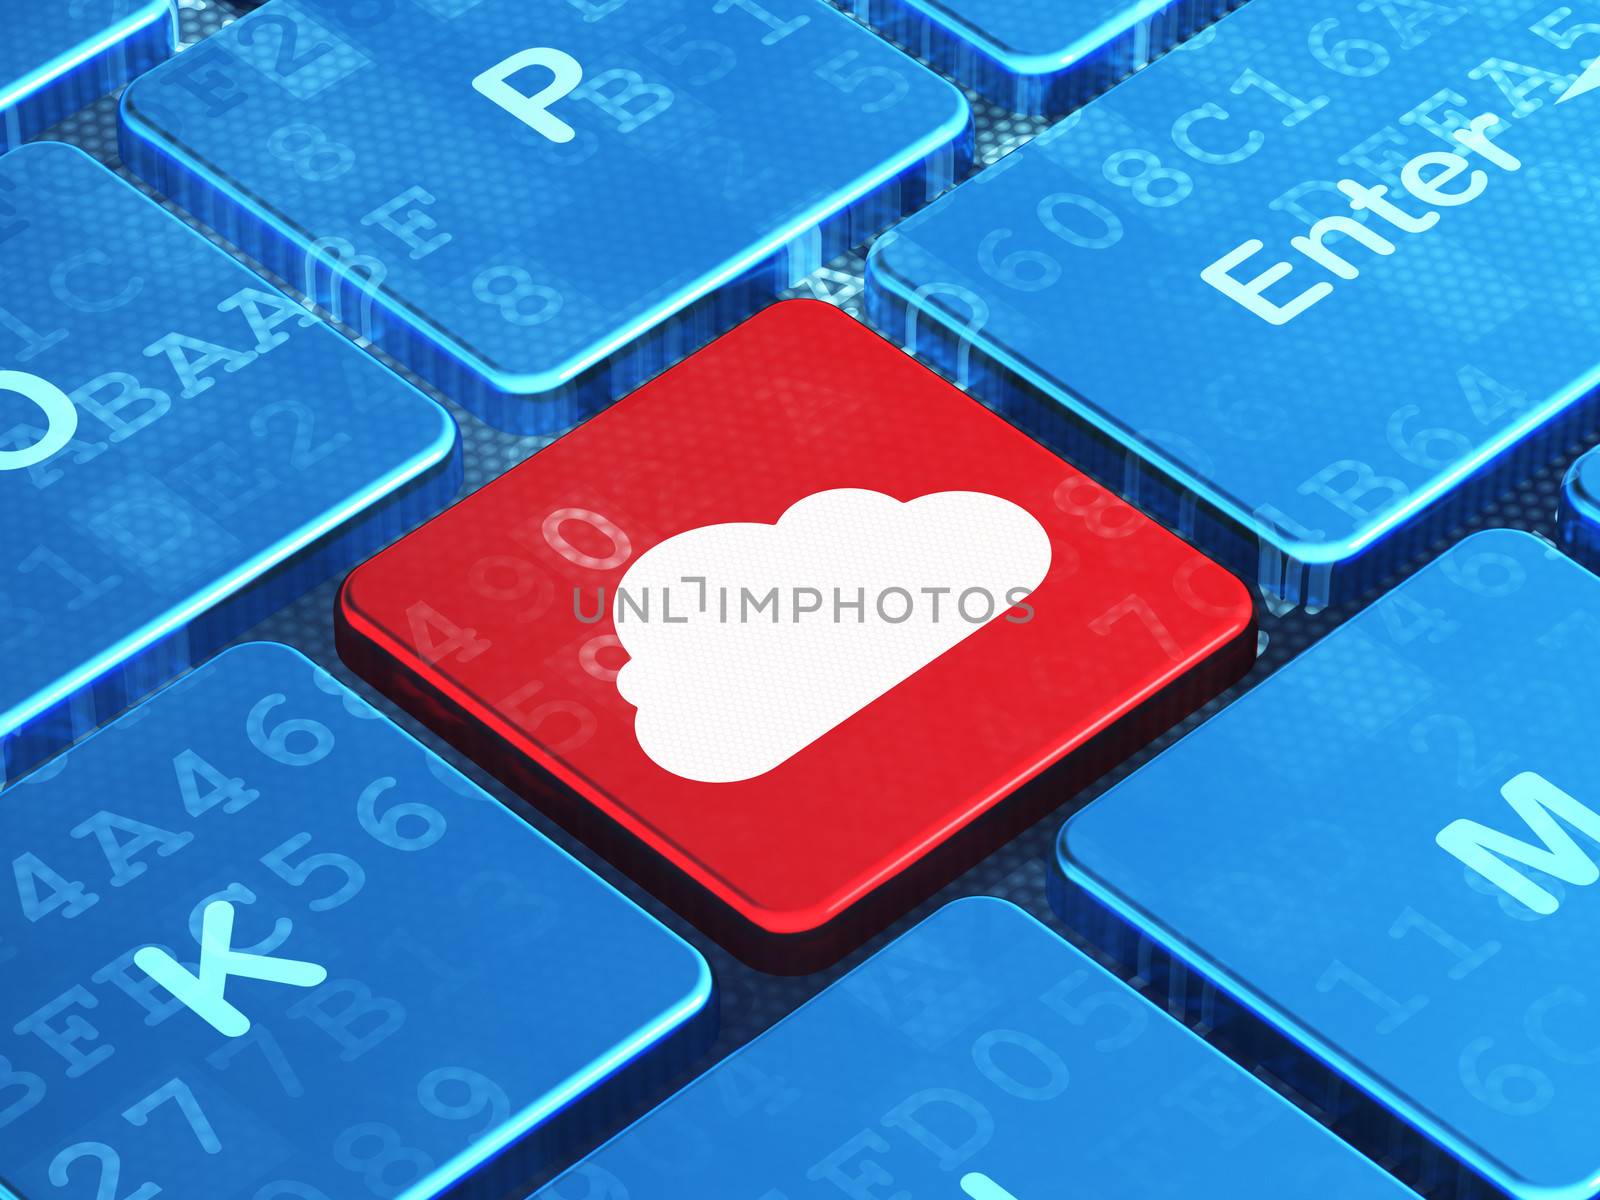 Cloud networking concept: computer keyboard with Cloud icon on enter button background, 3d render